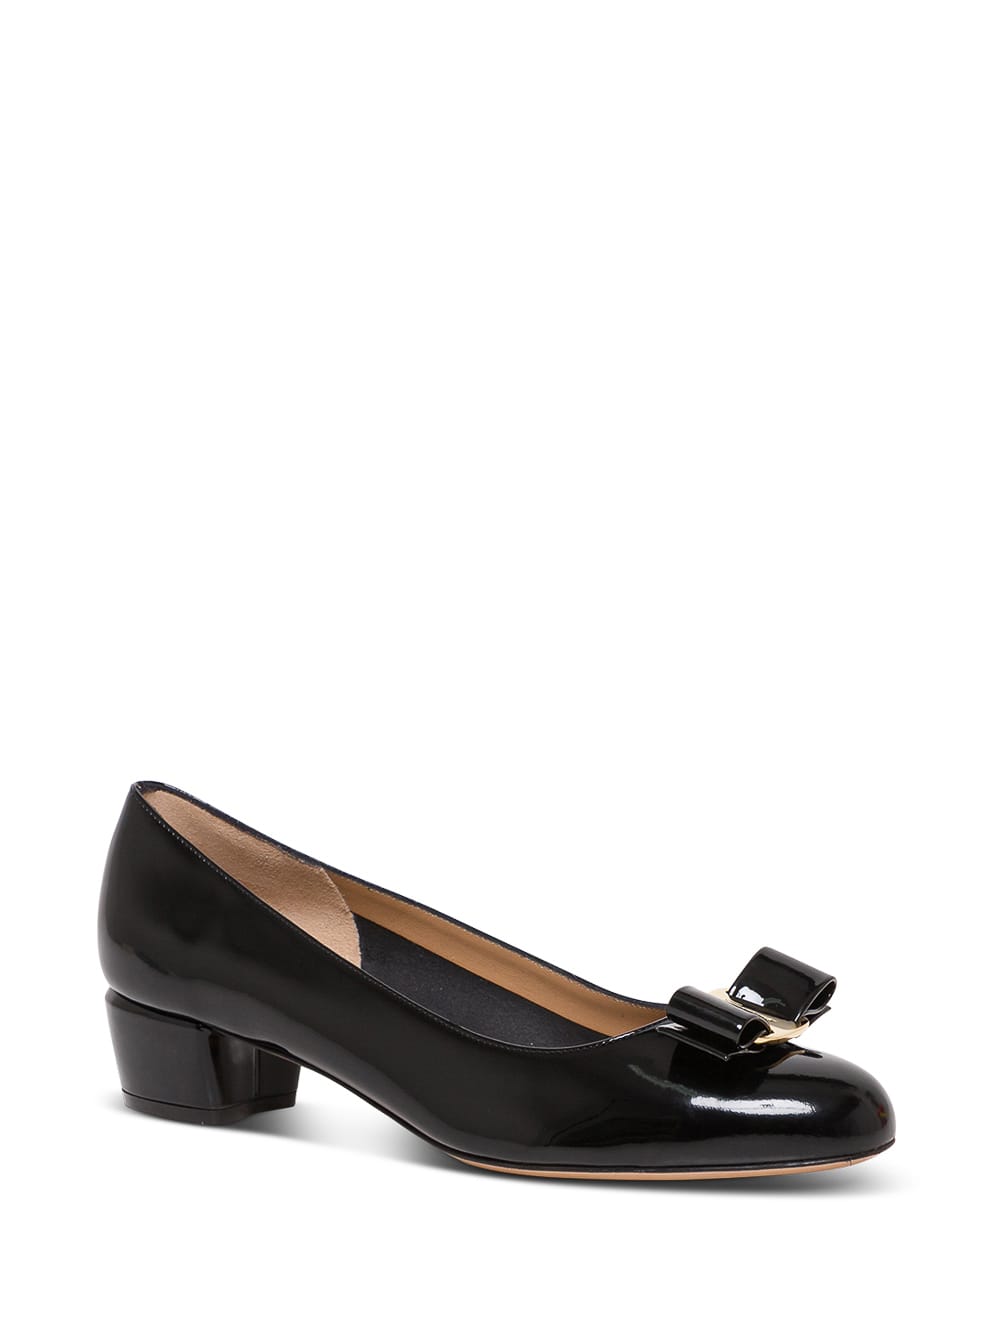 Vara Pumps In Black Patent Leather With Bow